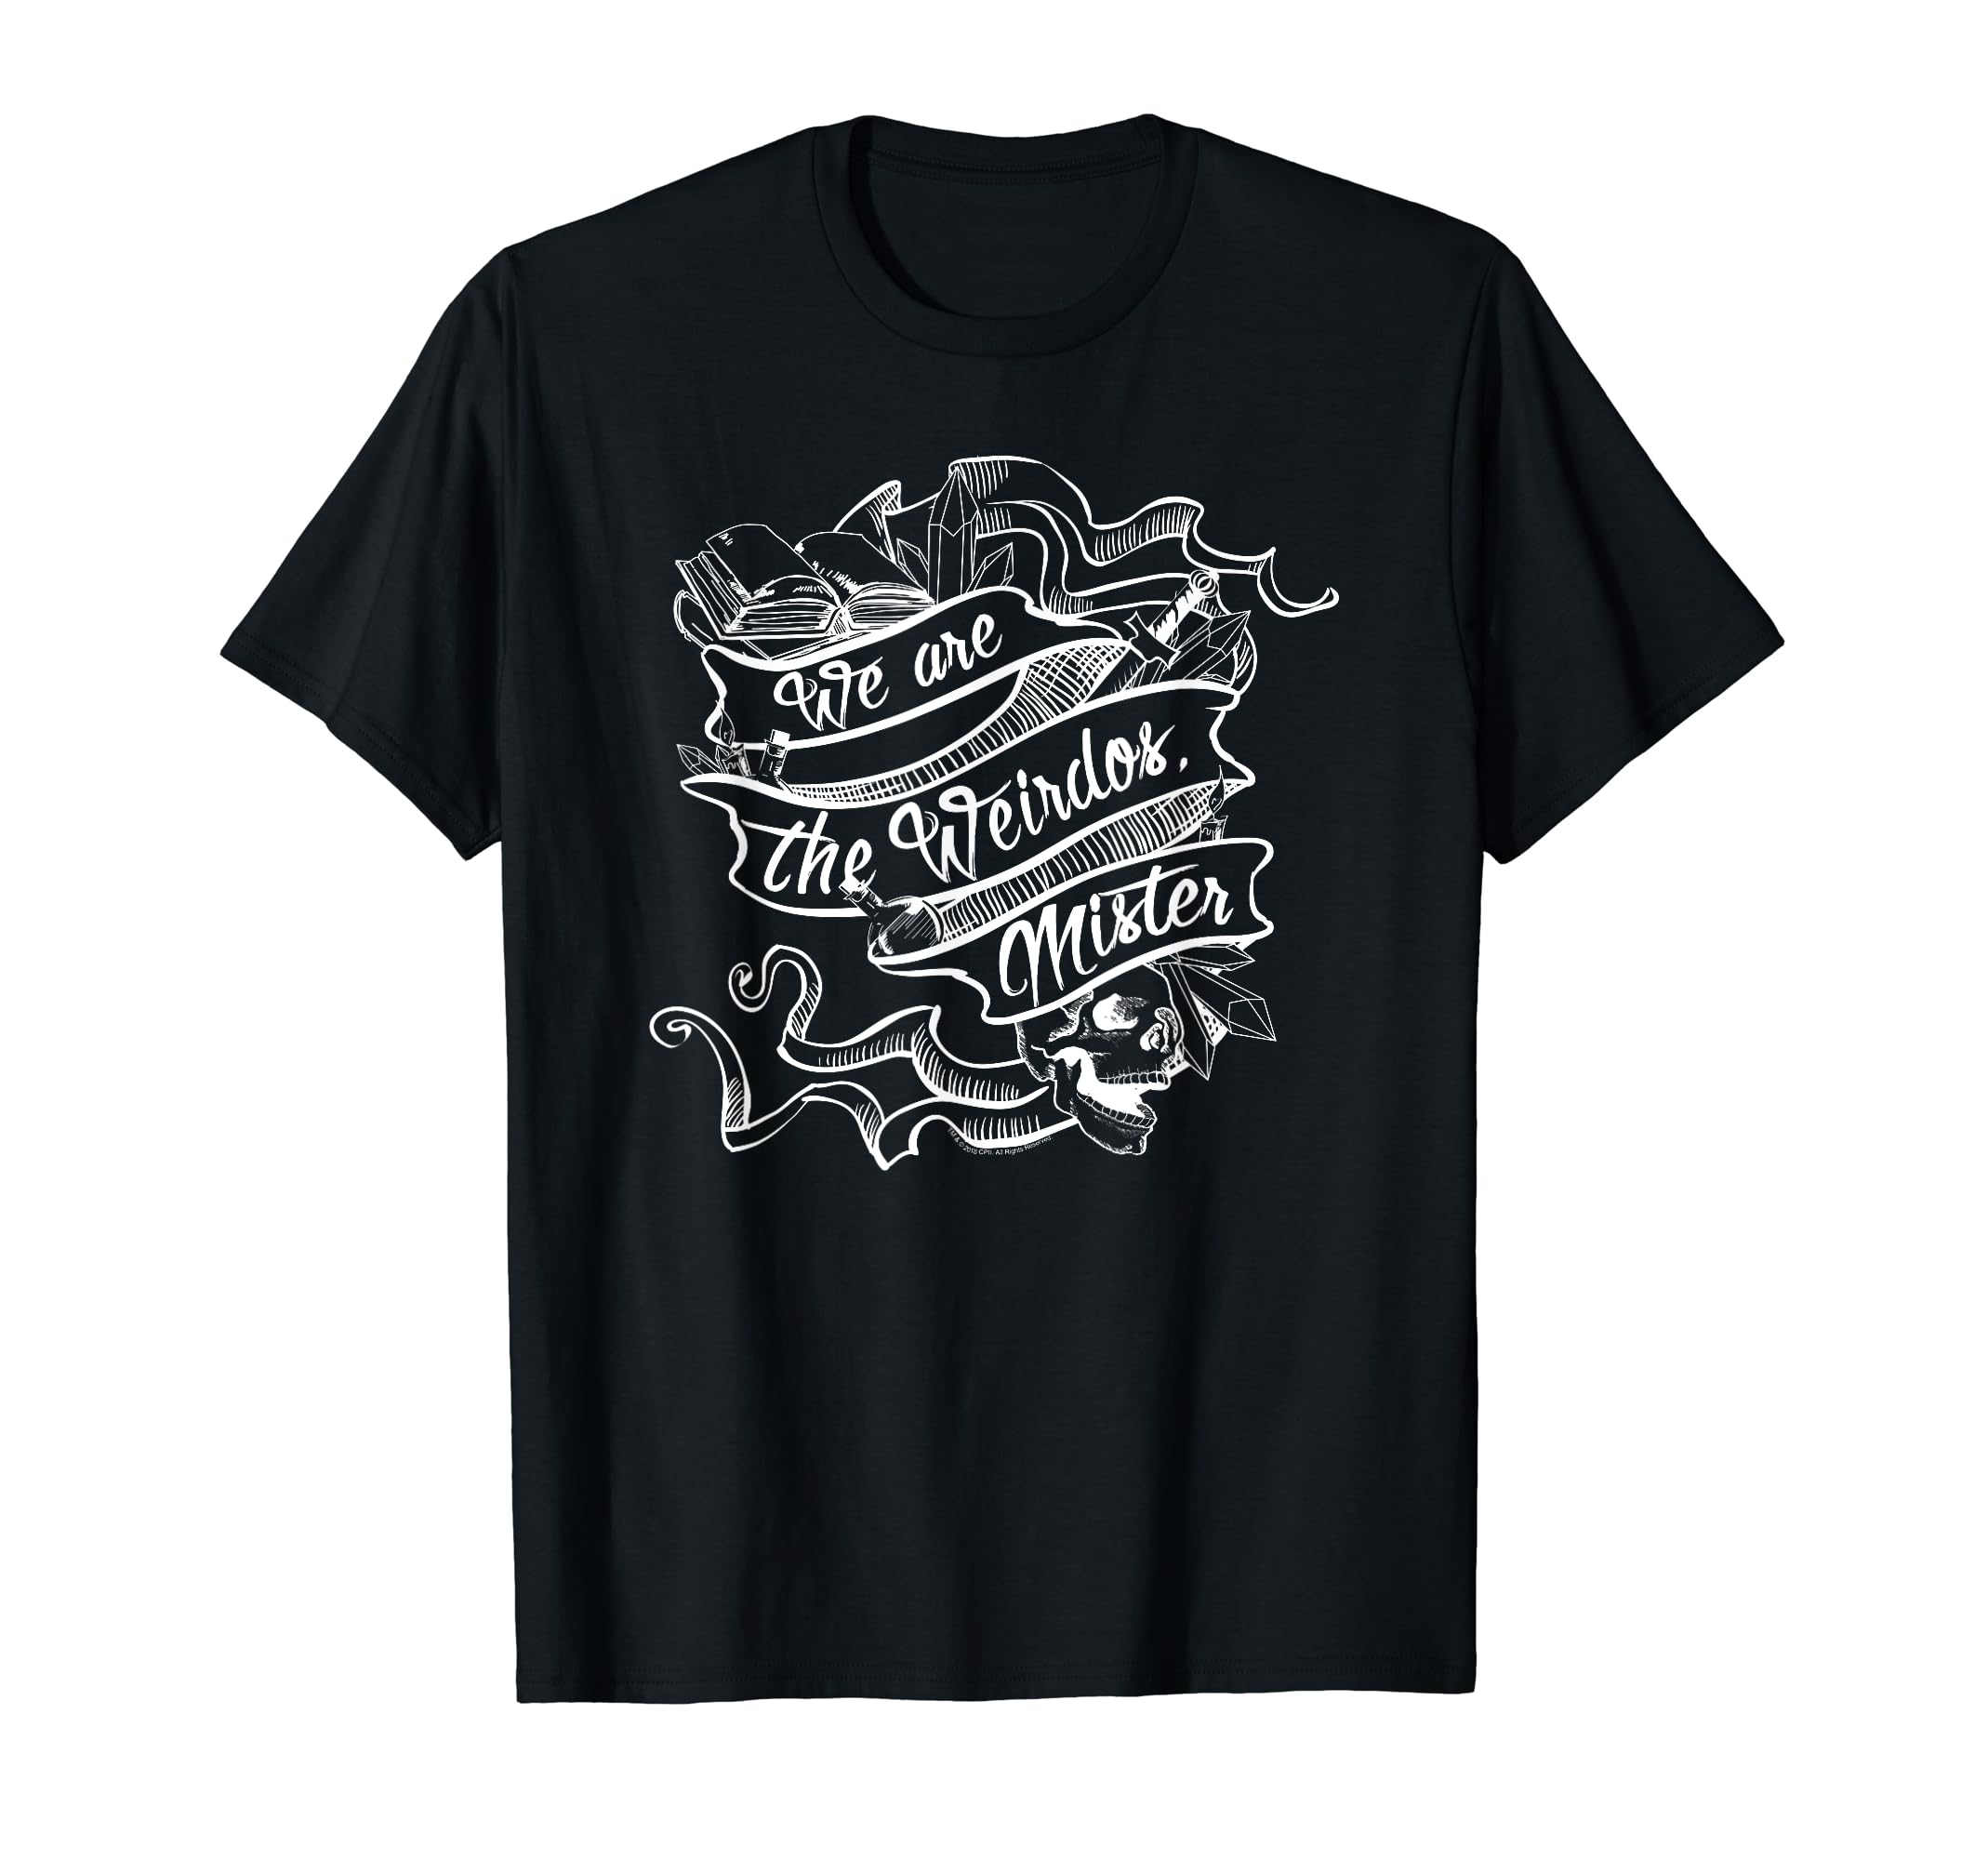 The Craft We are the Weirdos Mister T-Shirt